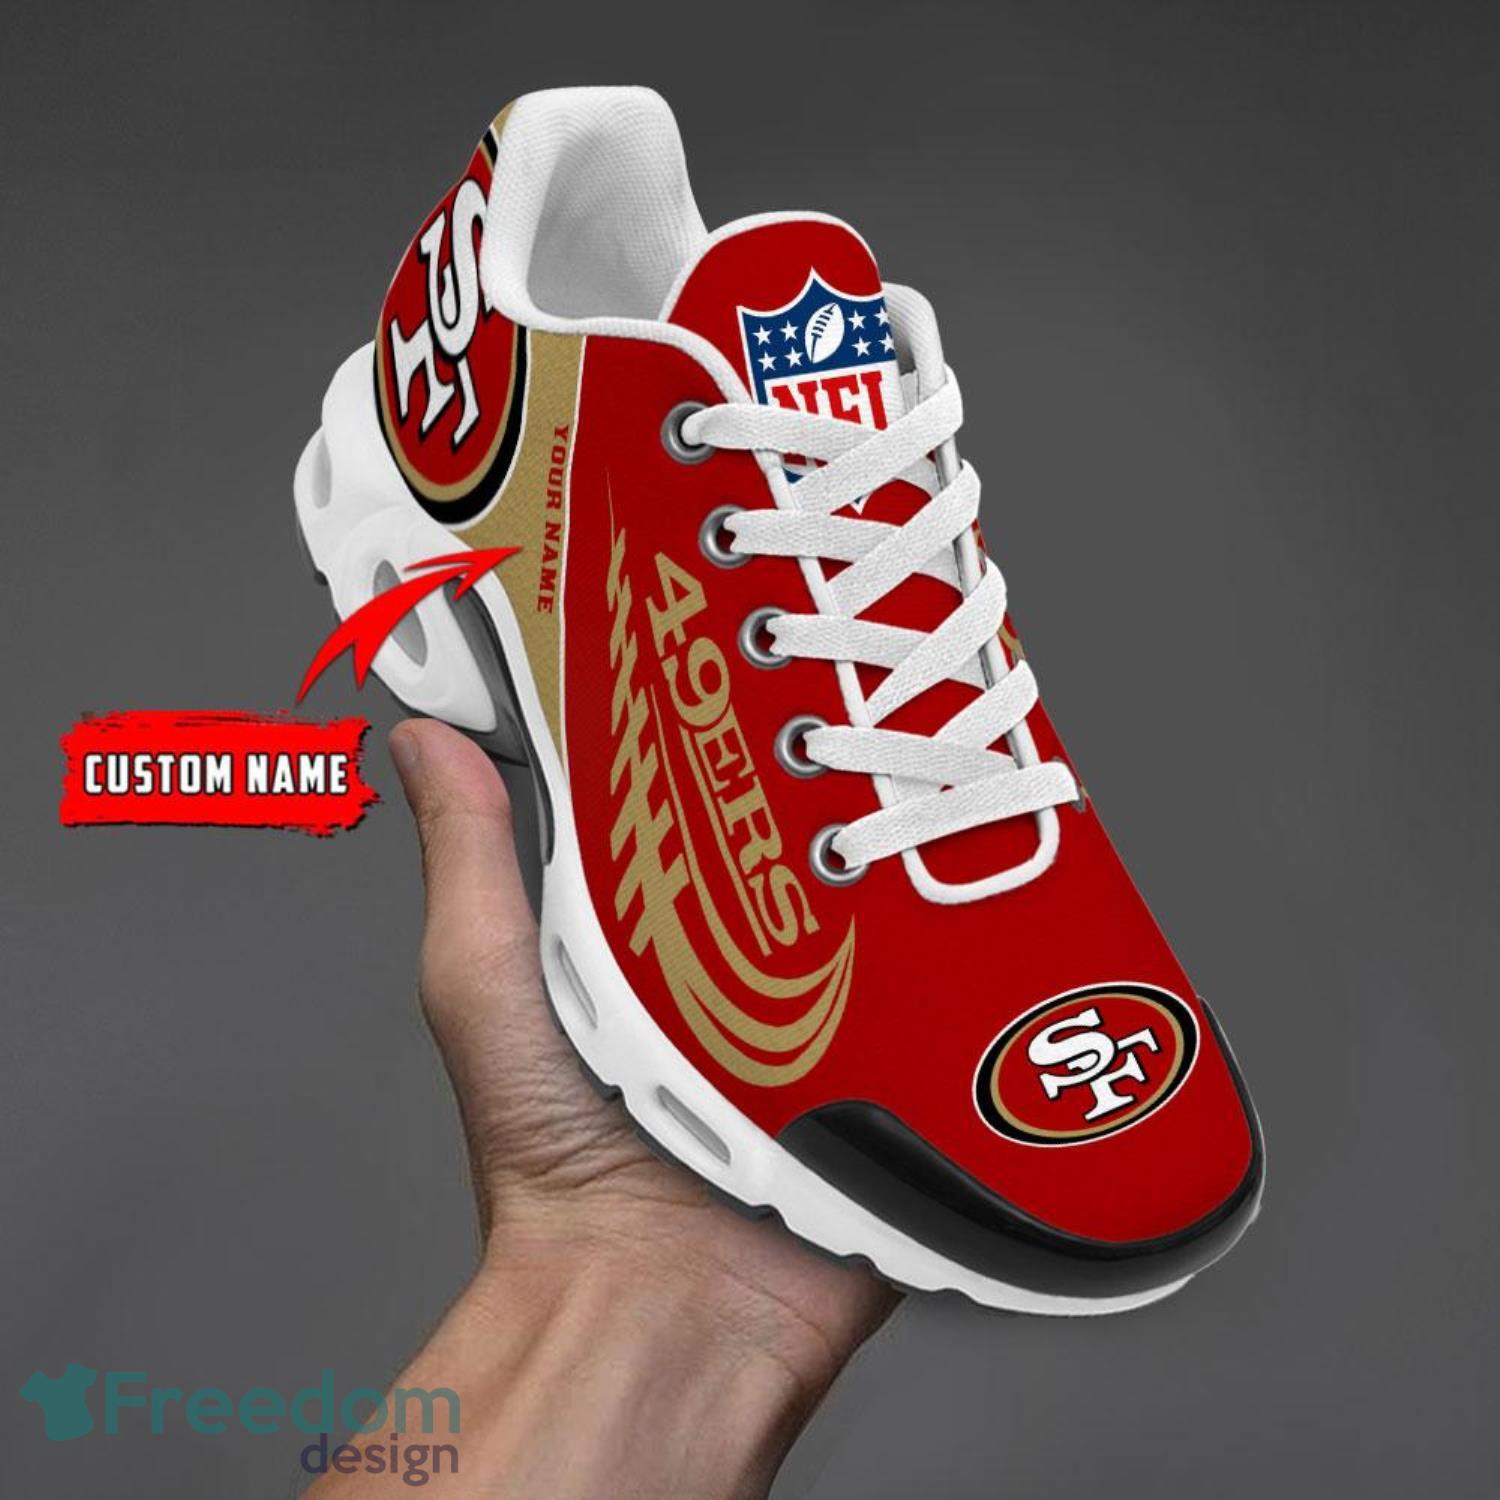 San Francisco 49ers Custom Name Air Cushion Sport Shoes For Fans Product Photo 1